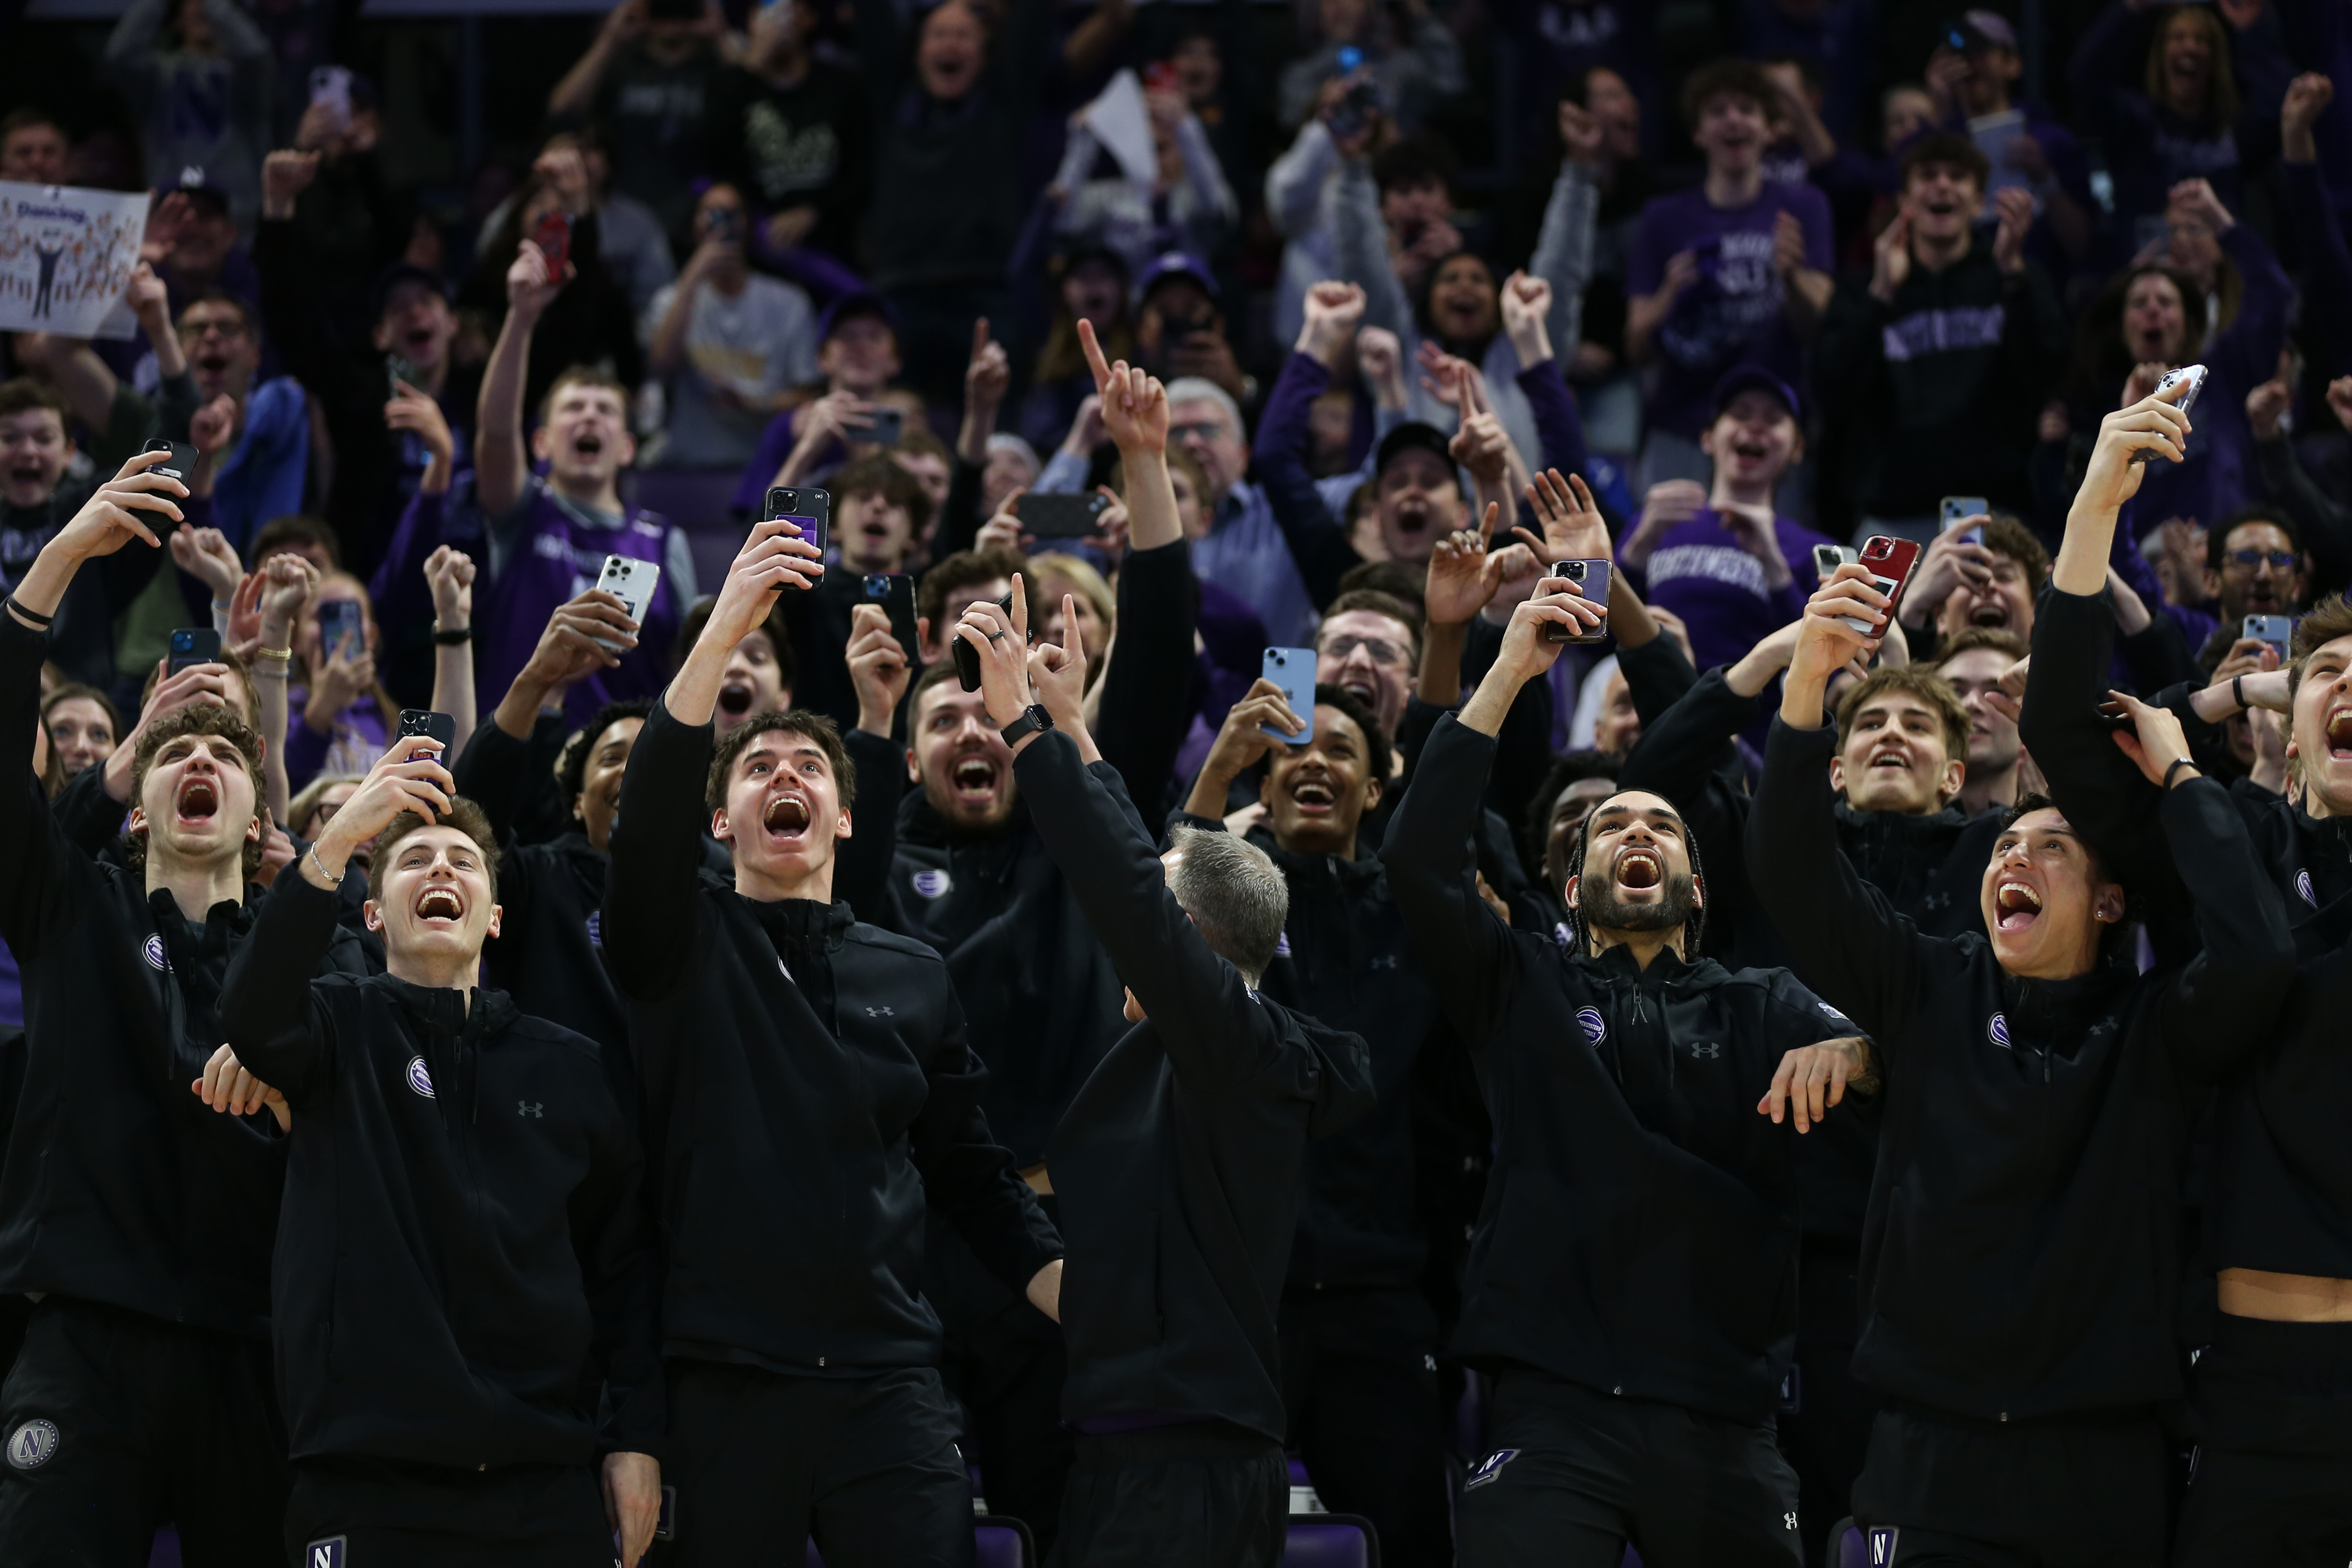 The Northwestern Men's basketball team celebrates during a NCAA selection show watch party at Welsh-Ryan Arena in Evanston on Sunday, March 17, 2024. The Northwestern Wildcats will face Florida Atlantic University in the first round of the NCAA Tournament. (Trent Sprague/Chicago Tribune)